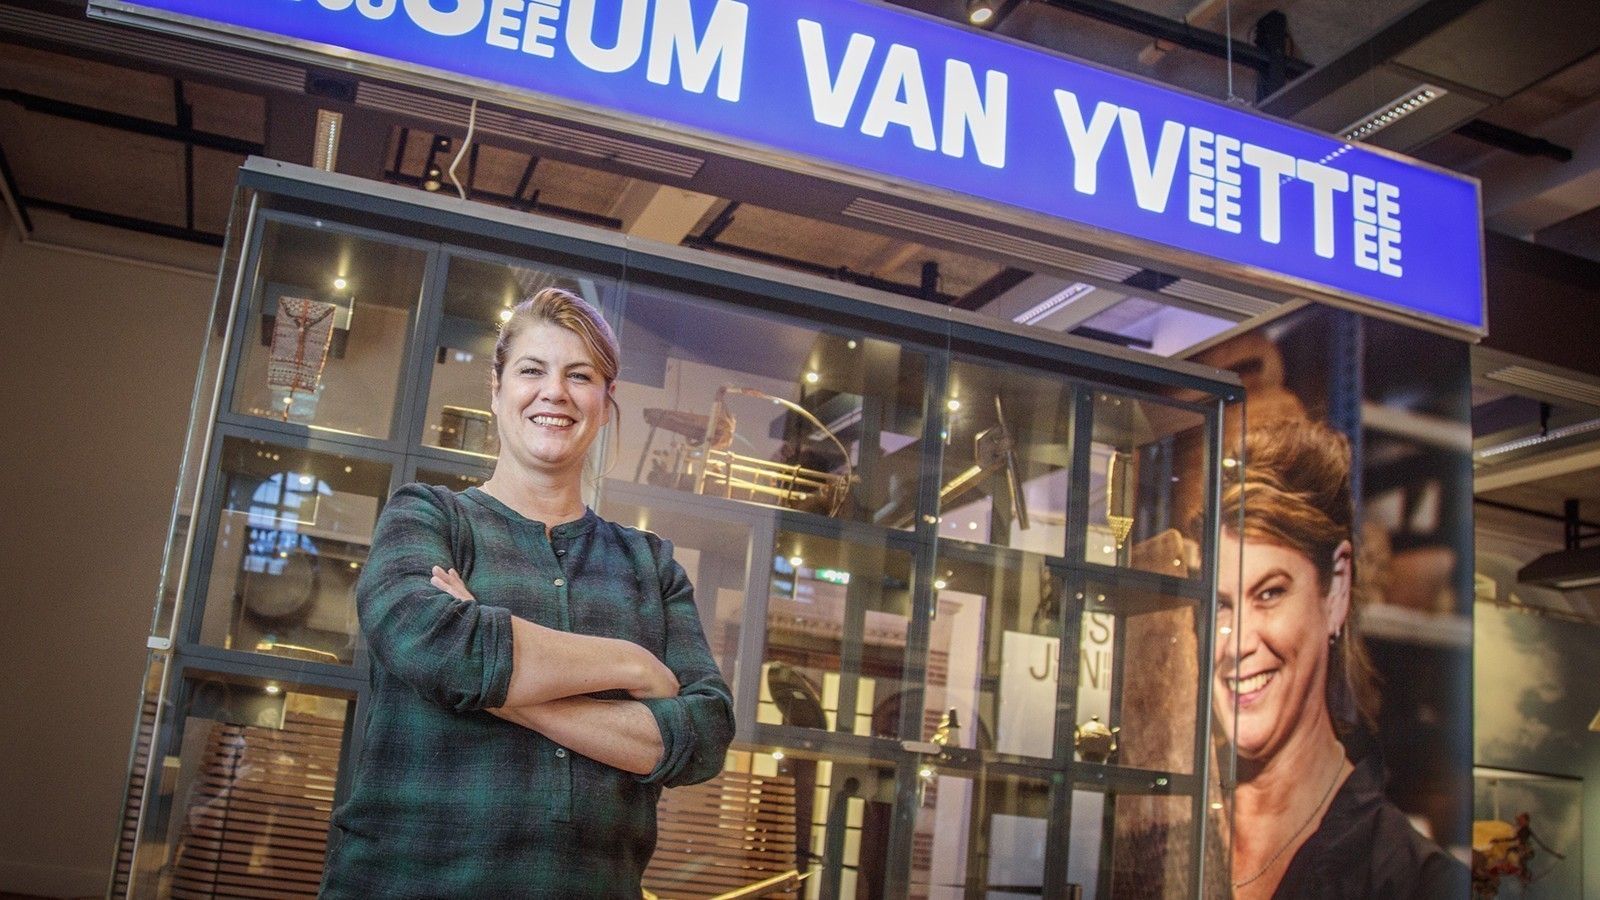 Mini museums at Dutch railway stations